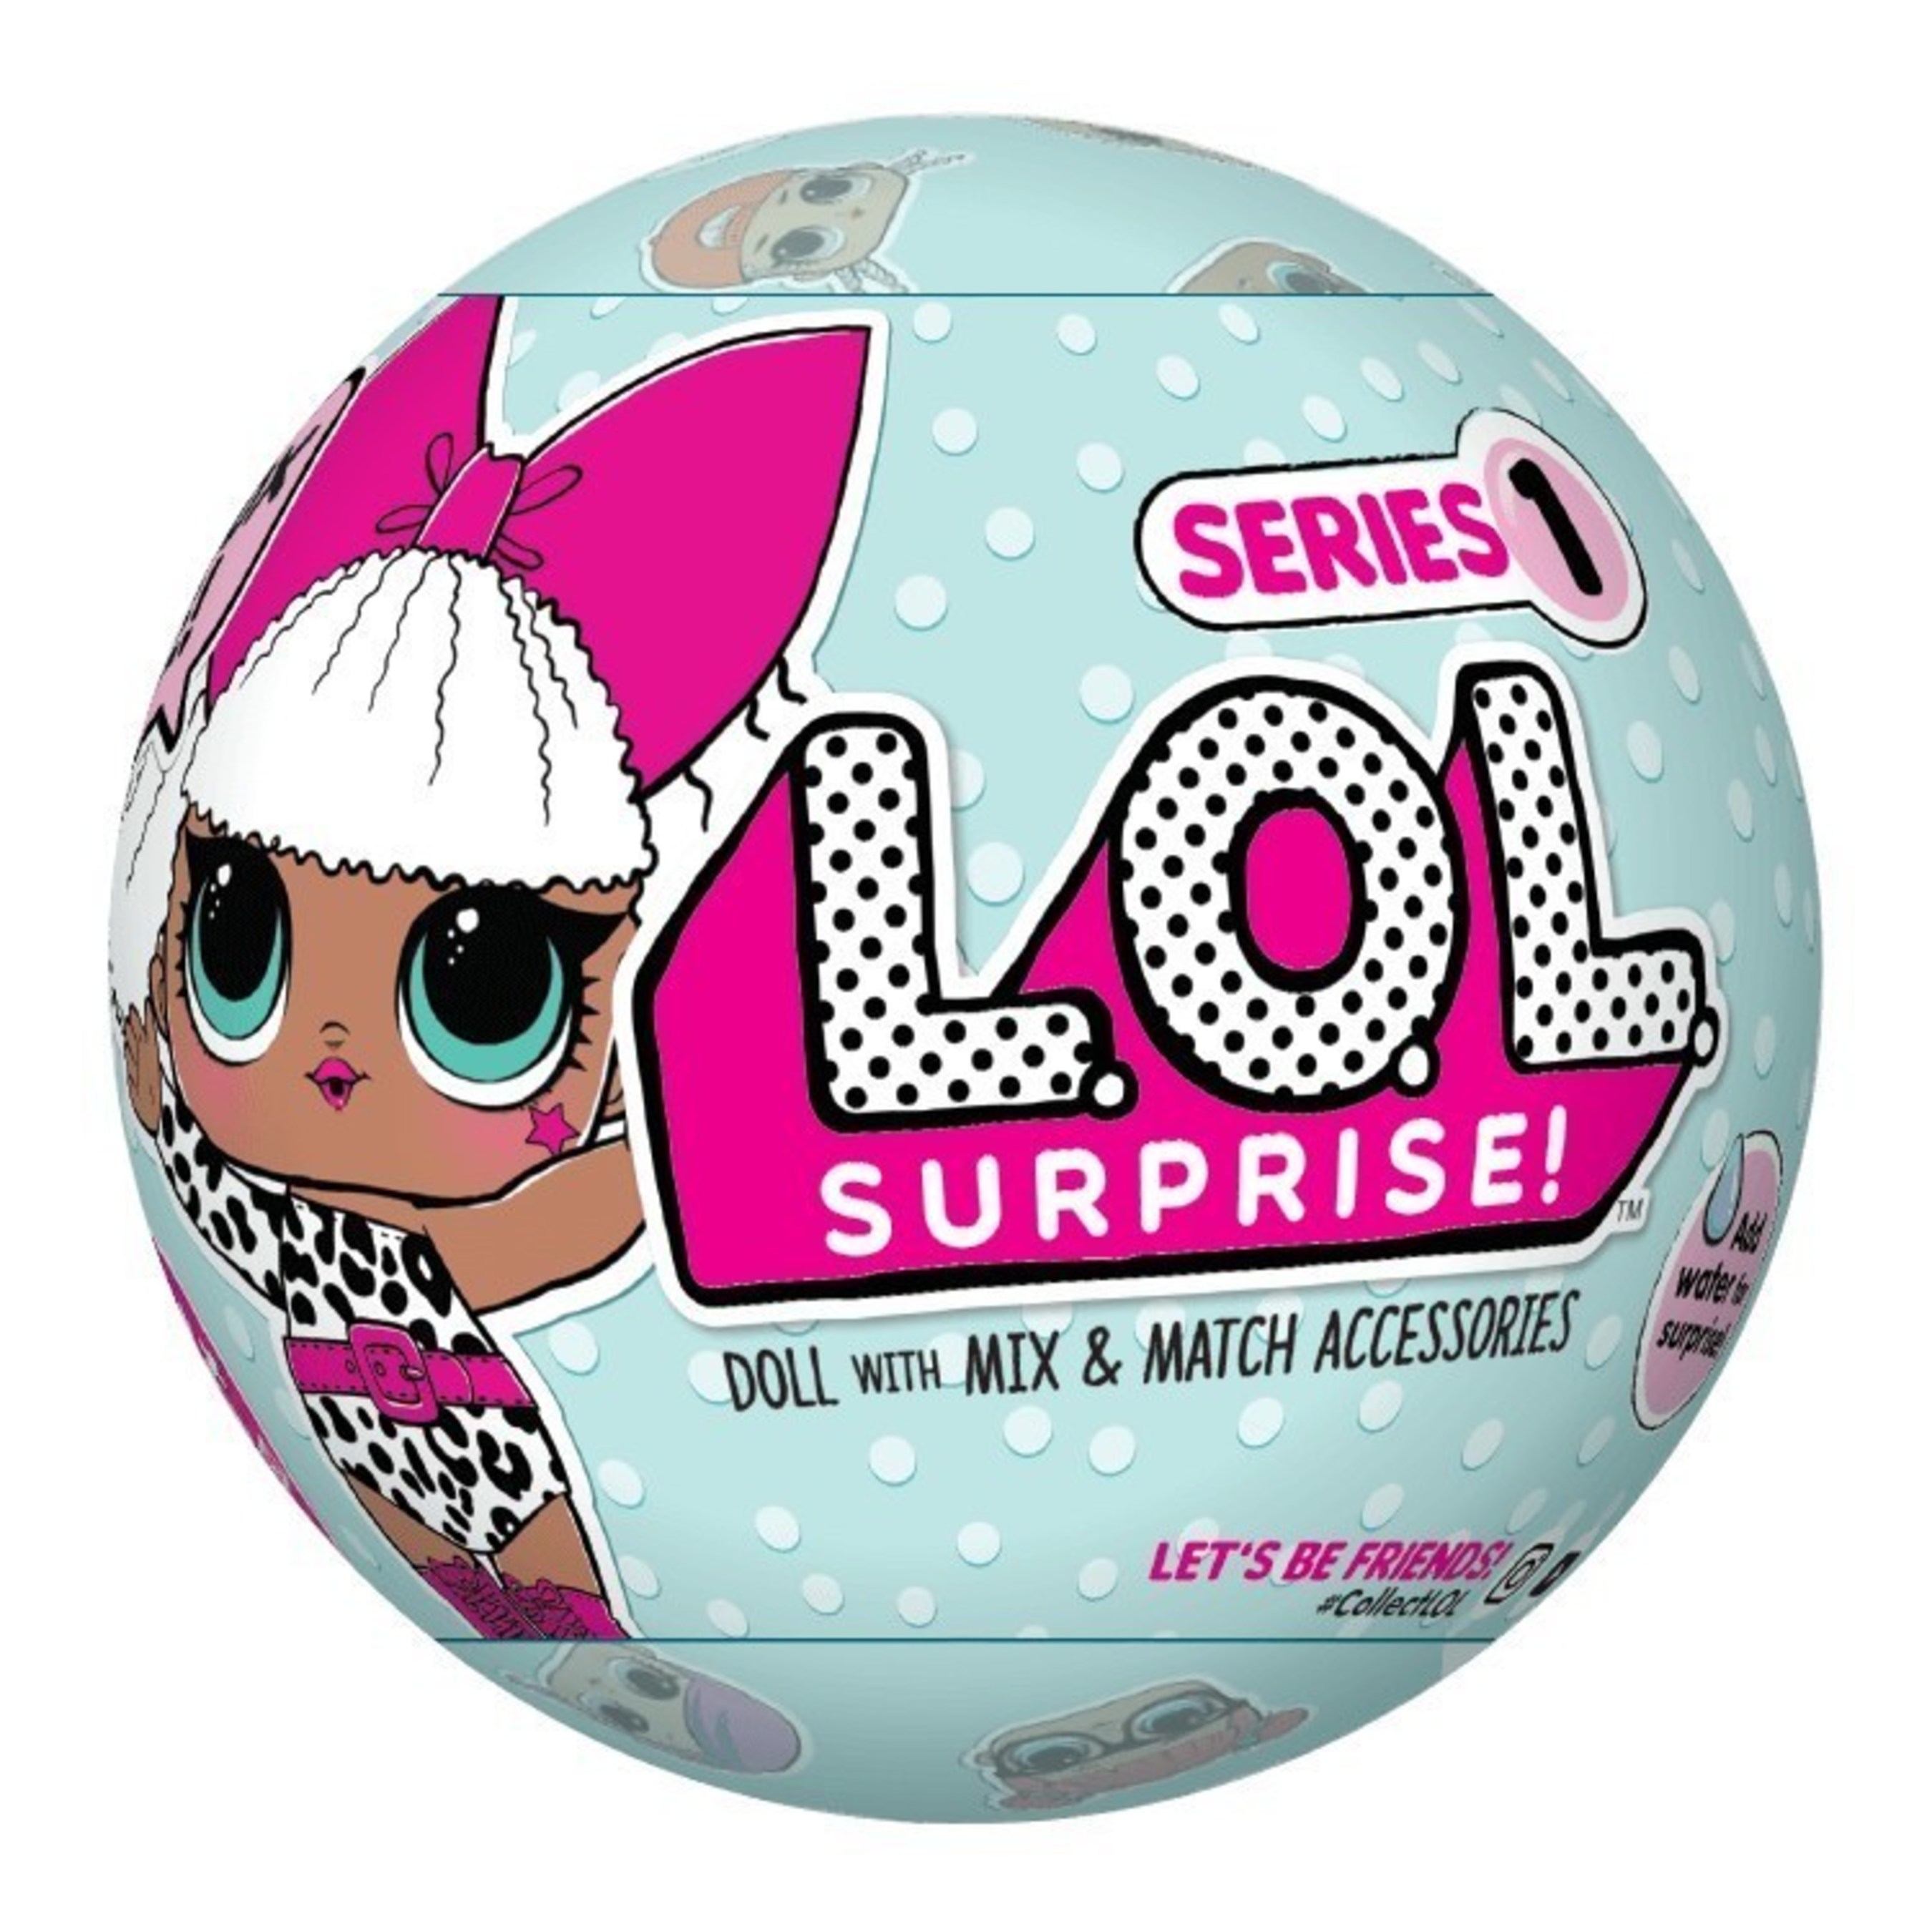 L.O.L. Surprise!(TM) unwraps the internet phenomenon of unboxing IRL with seven layers of surprise to discover!